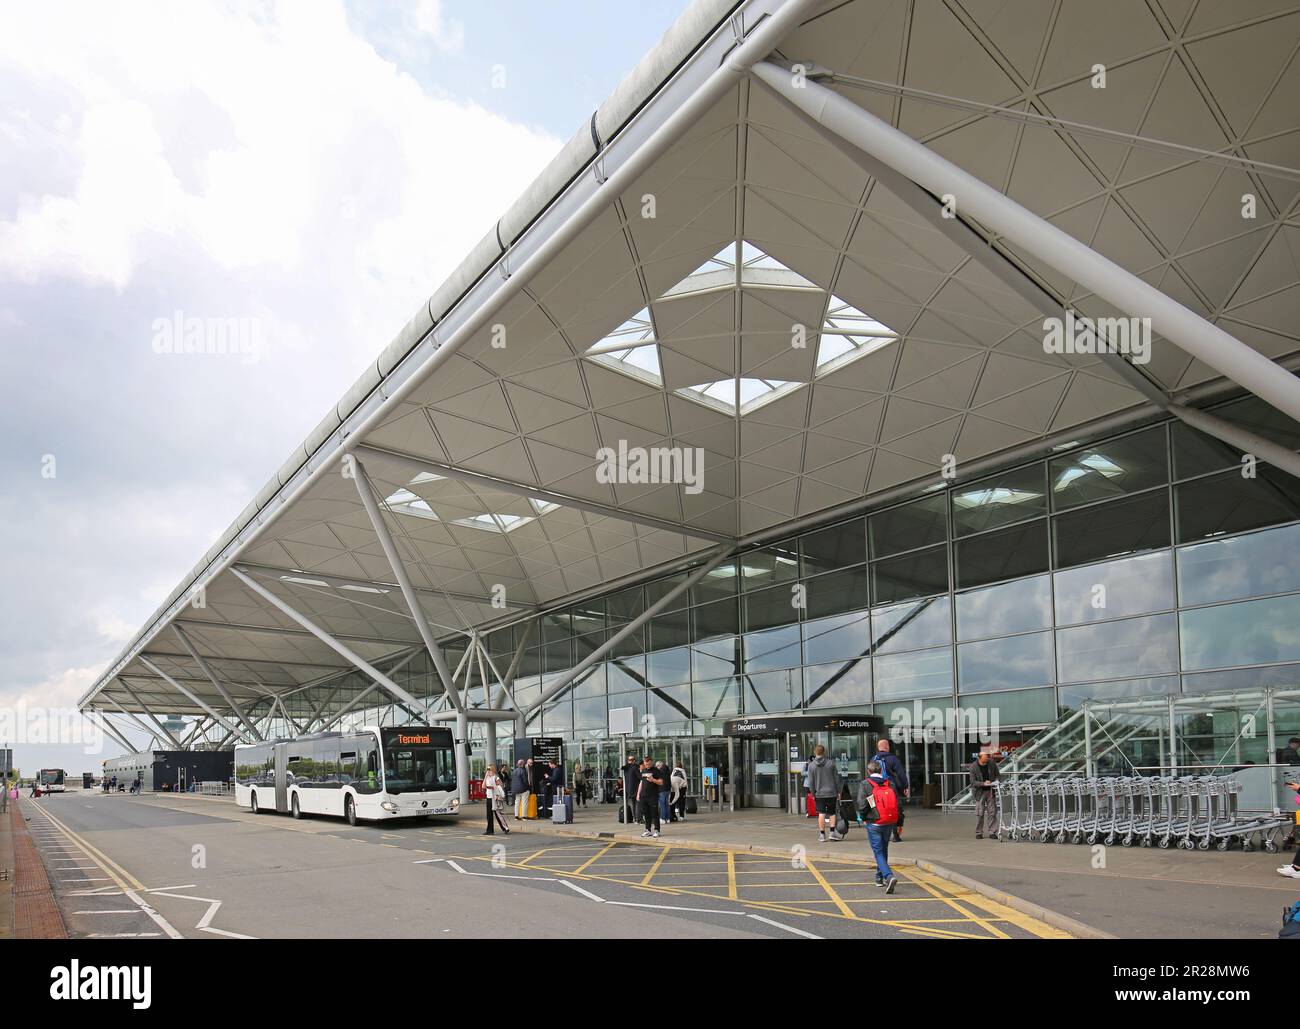 Stansted Airport, UK. A Car Park shuttle bus drops passengers in front of the main terminal building Stock Photo